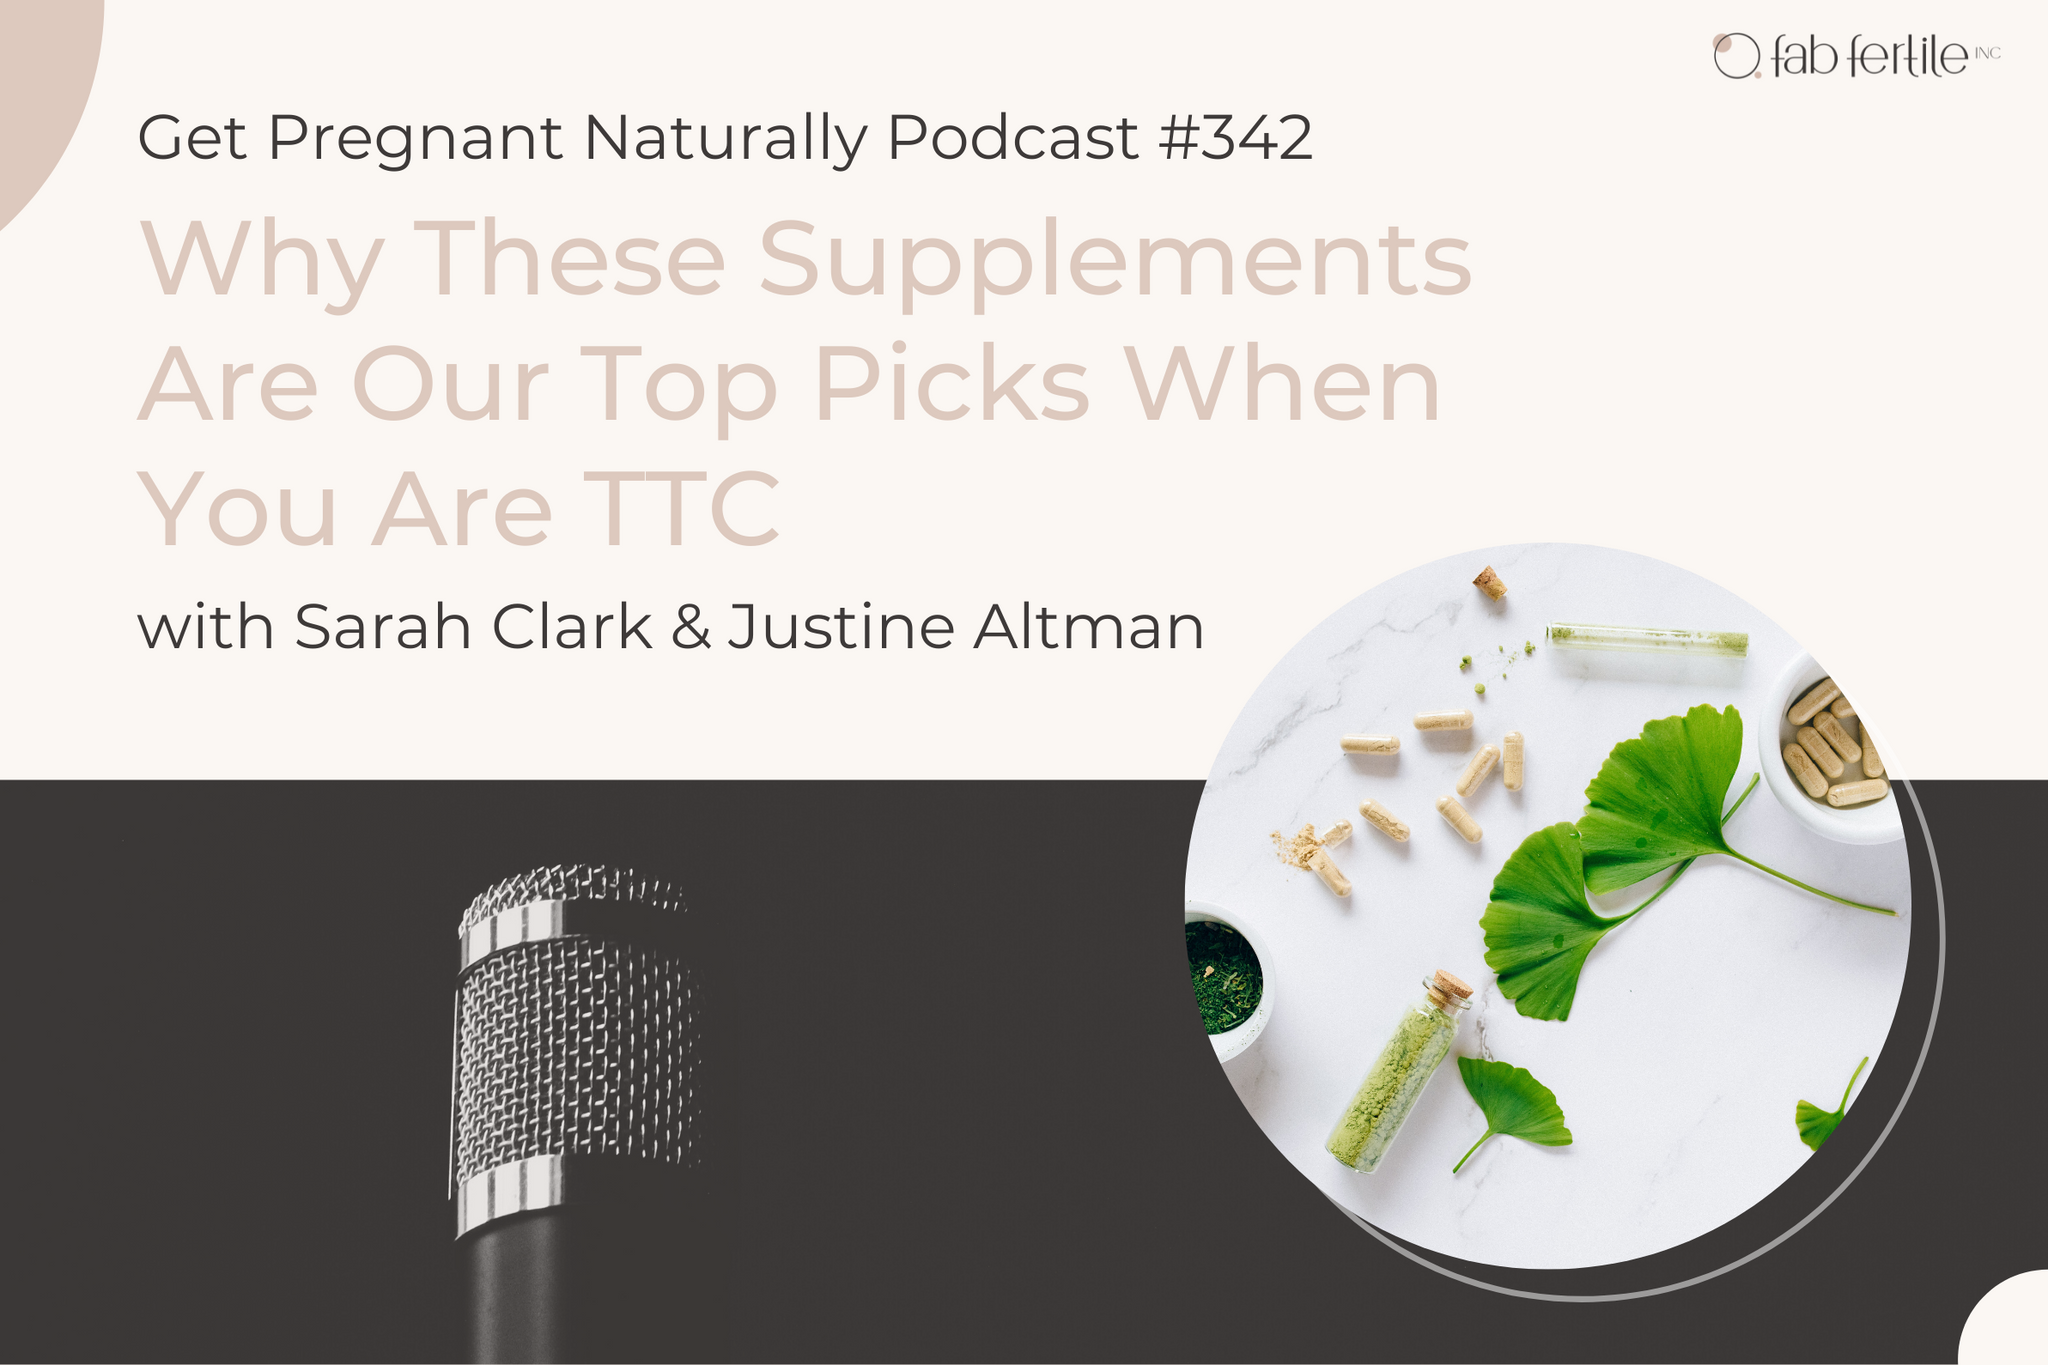 Why These Supplements Are Our Top Picks When You Are TTC